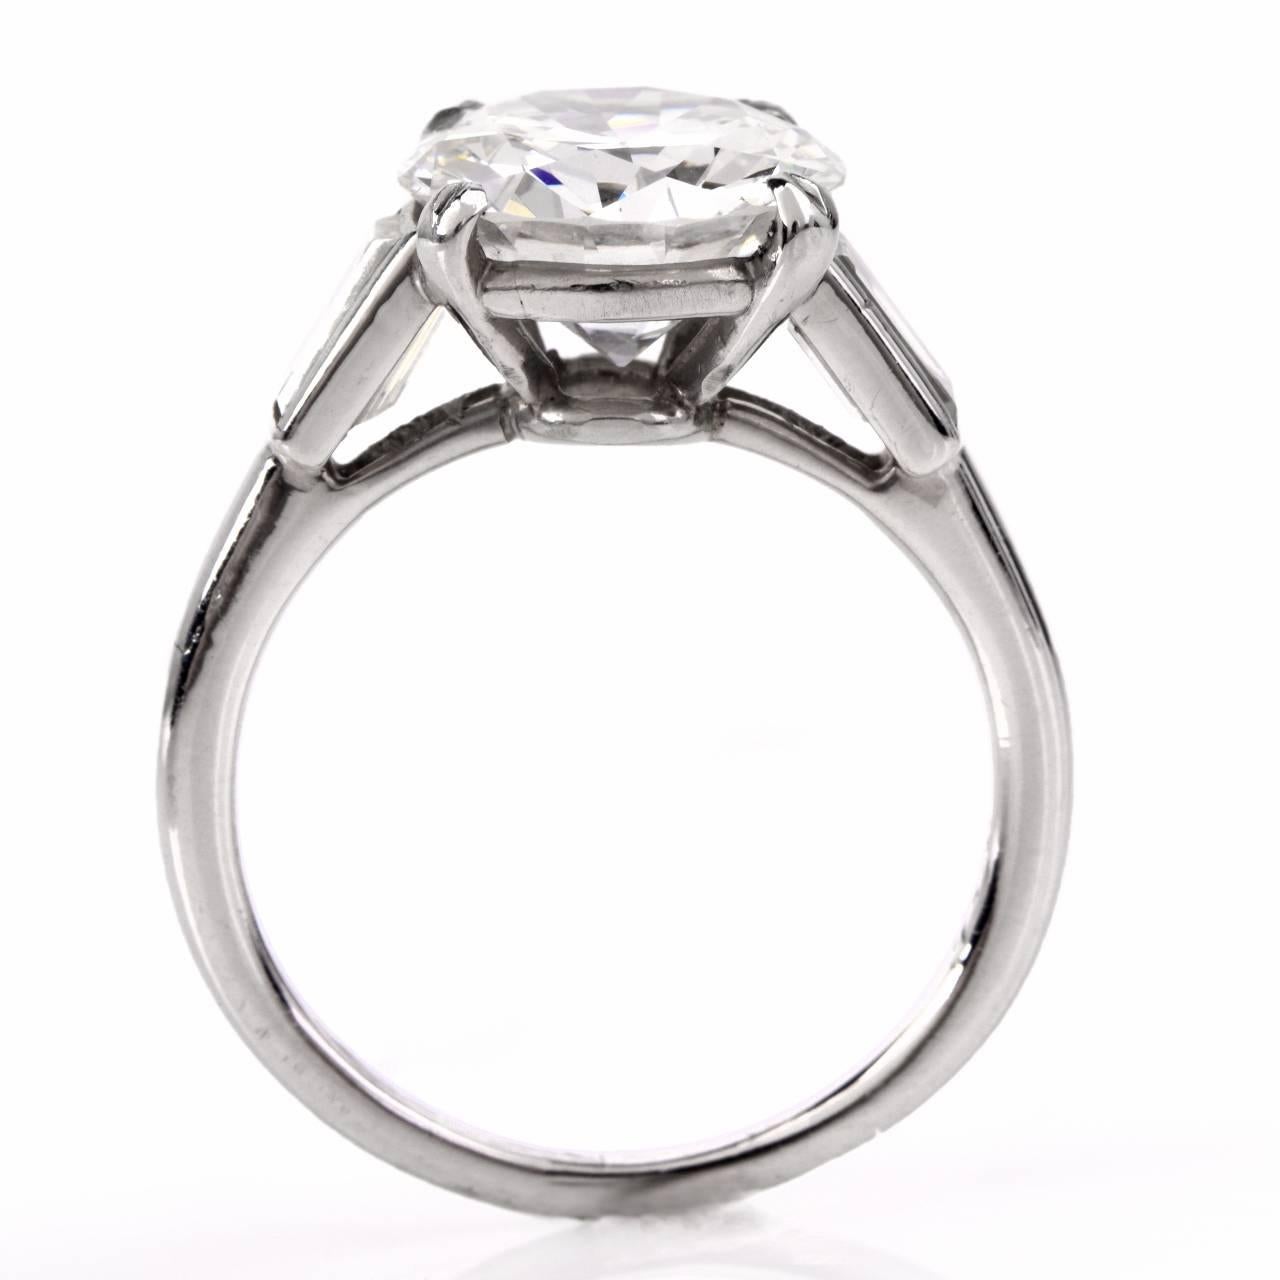 This cartier  diamond engagement solitaire ring  is crafted in solid  platinum, weighing approx: 5.0 grams with center diamond  wighing aprox. 3.21cts, GIA certified H color SI1  with an impacable brilliance.  This classic ring, set with two tapper